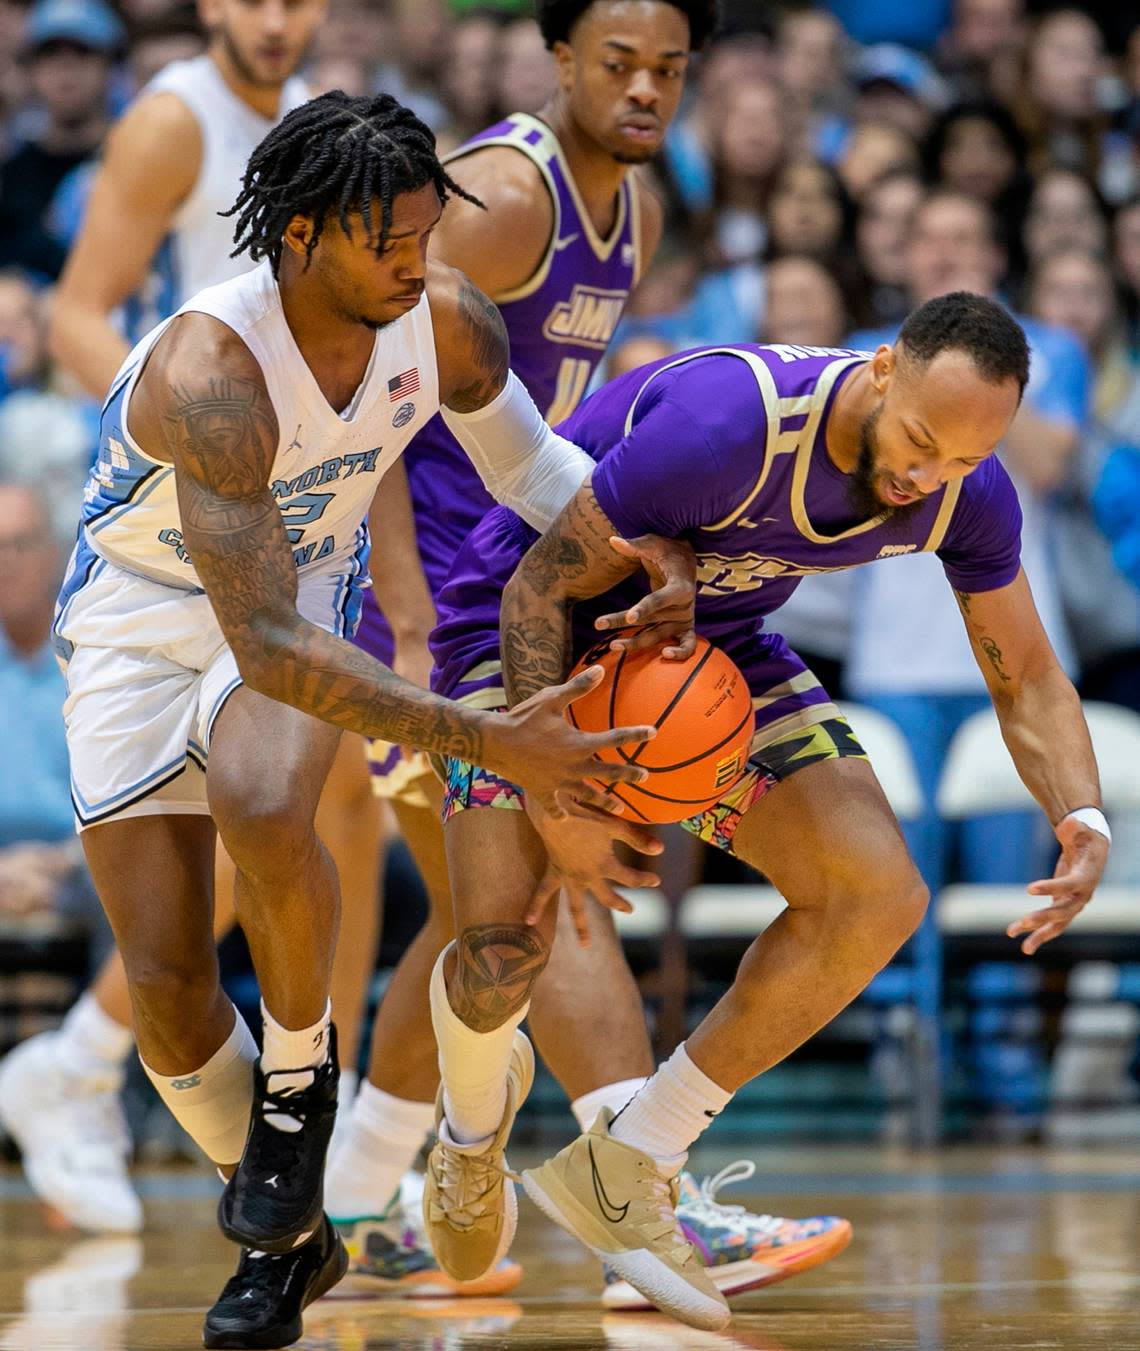 North Carolina’s Caleb Love (2) makes a steal from James Madison’s Takal Molson (15) in the first half on Sunday, November 20, 2022 at the Smith Center in Chapel Hill, N.C.